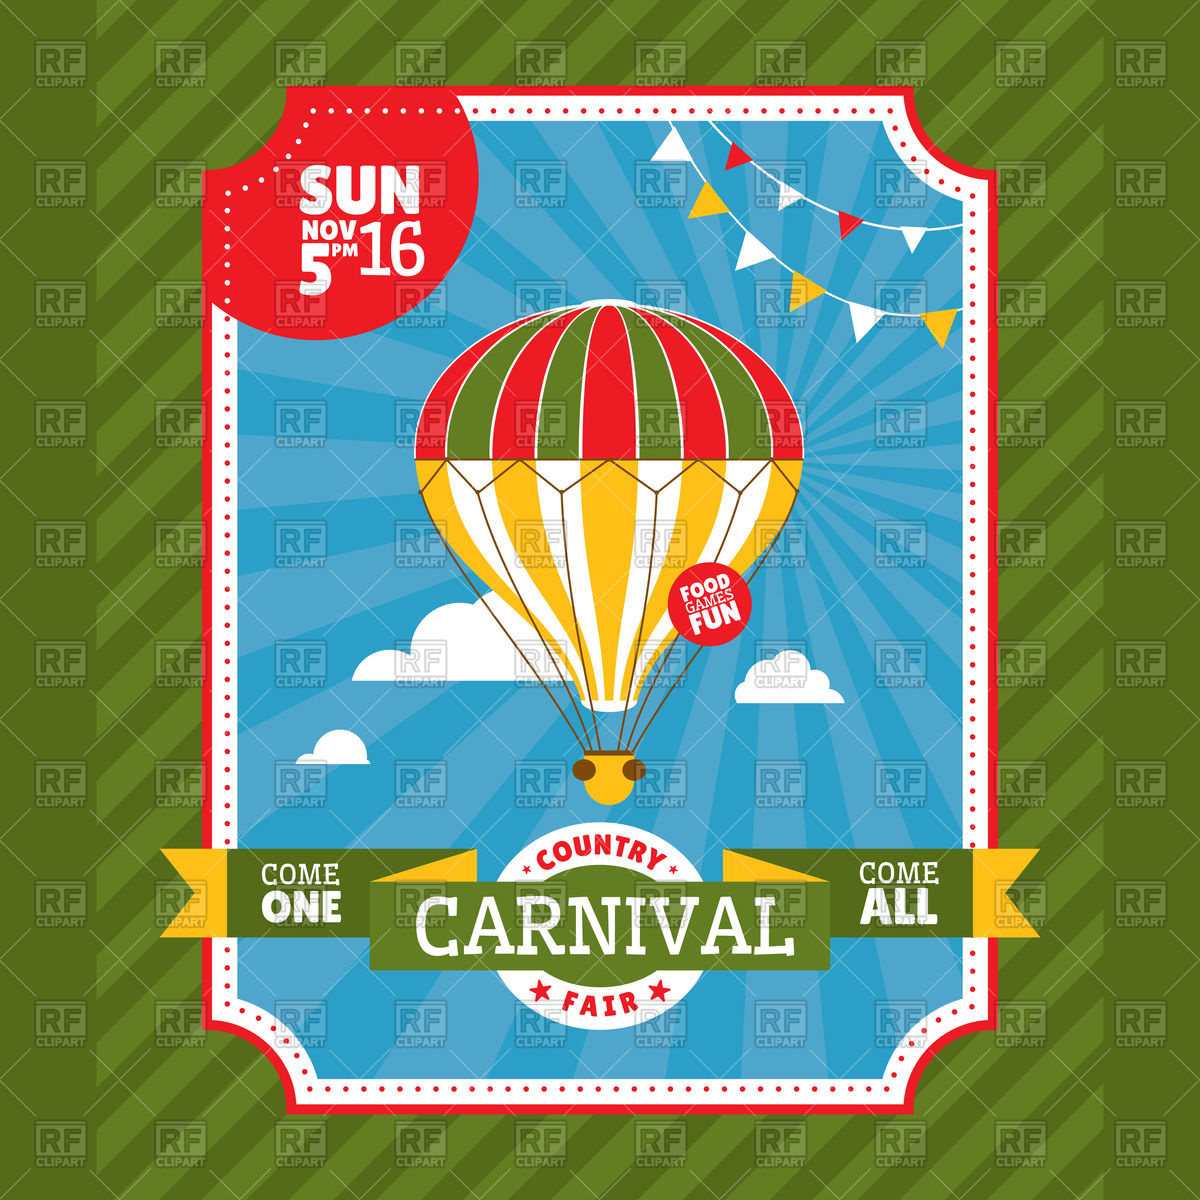 Country Fair Invitation Card With Air Balloon 51066 Download Royalty